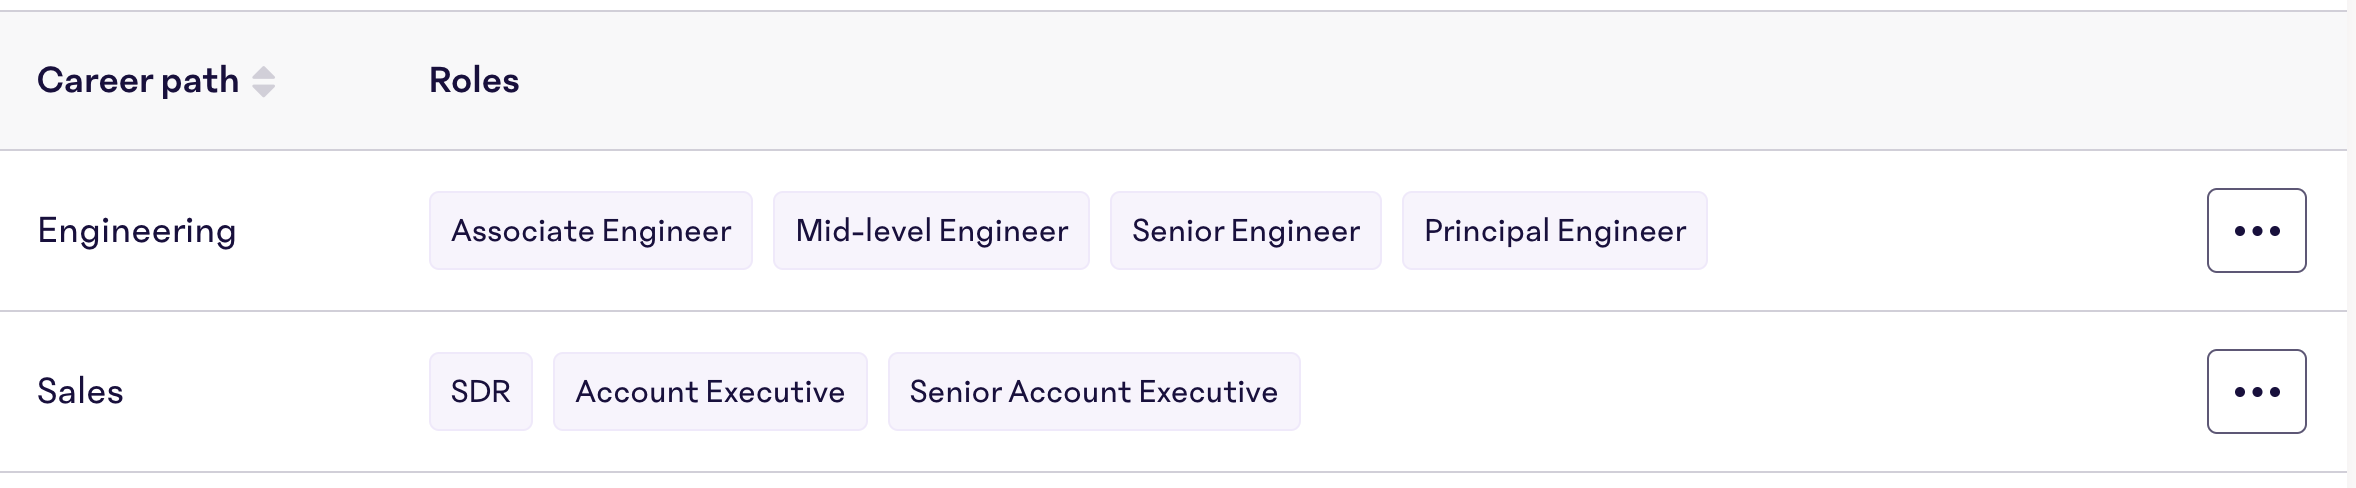 Career-Paths-Roles.png